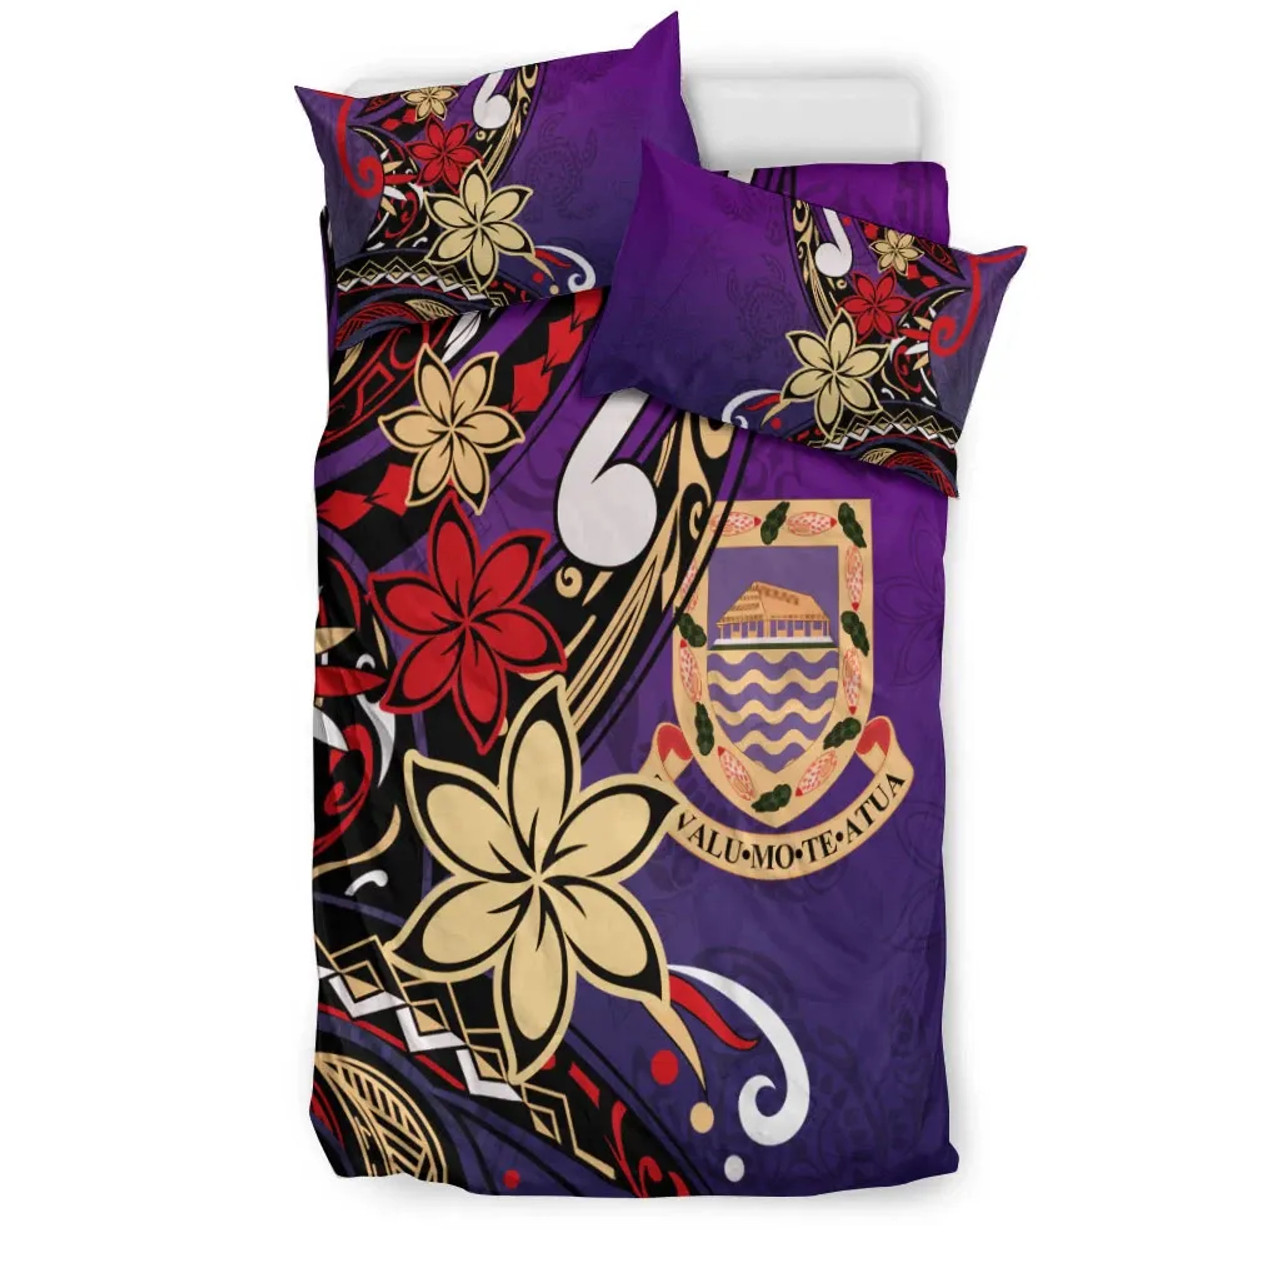 Tuvalu Polynesian Bedding Set - Tribal Flower With Special Turtles Purple Color 2